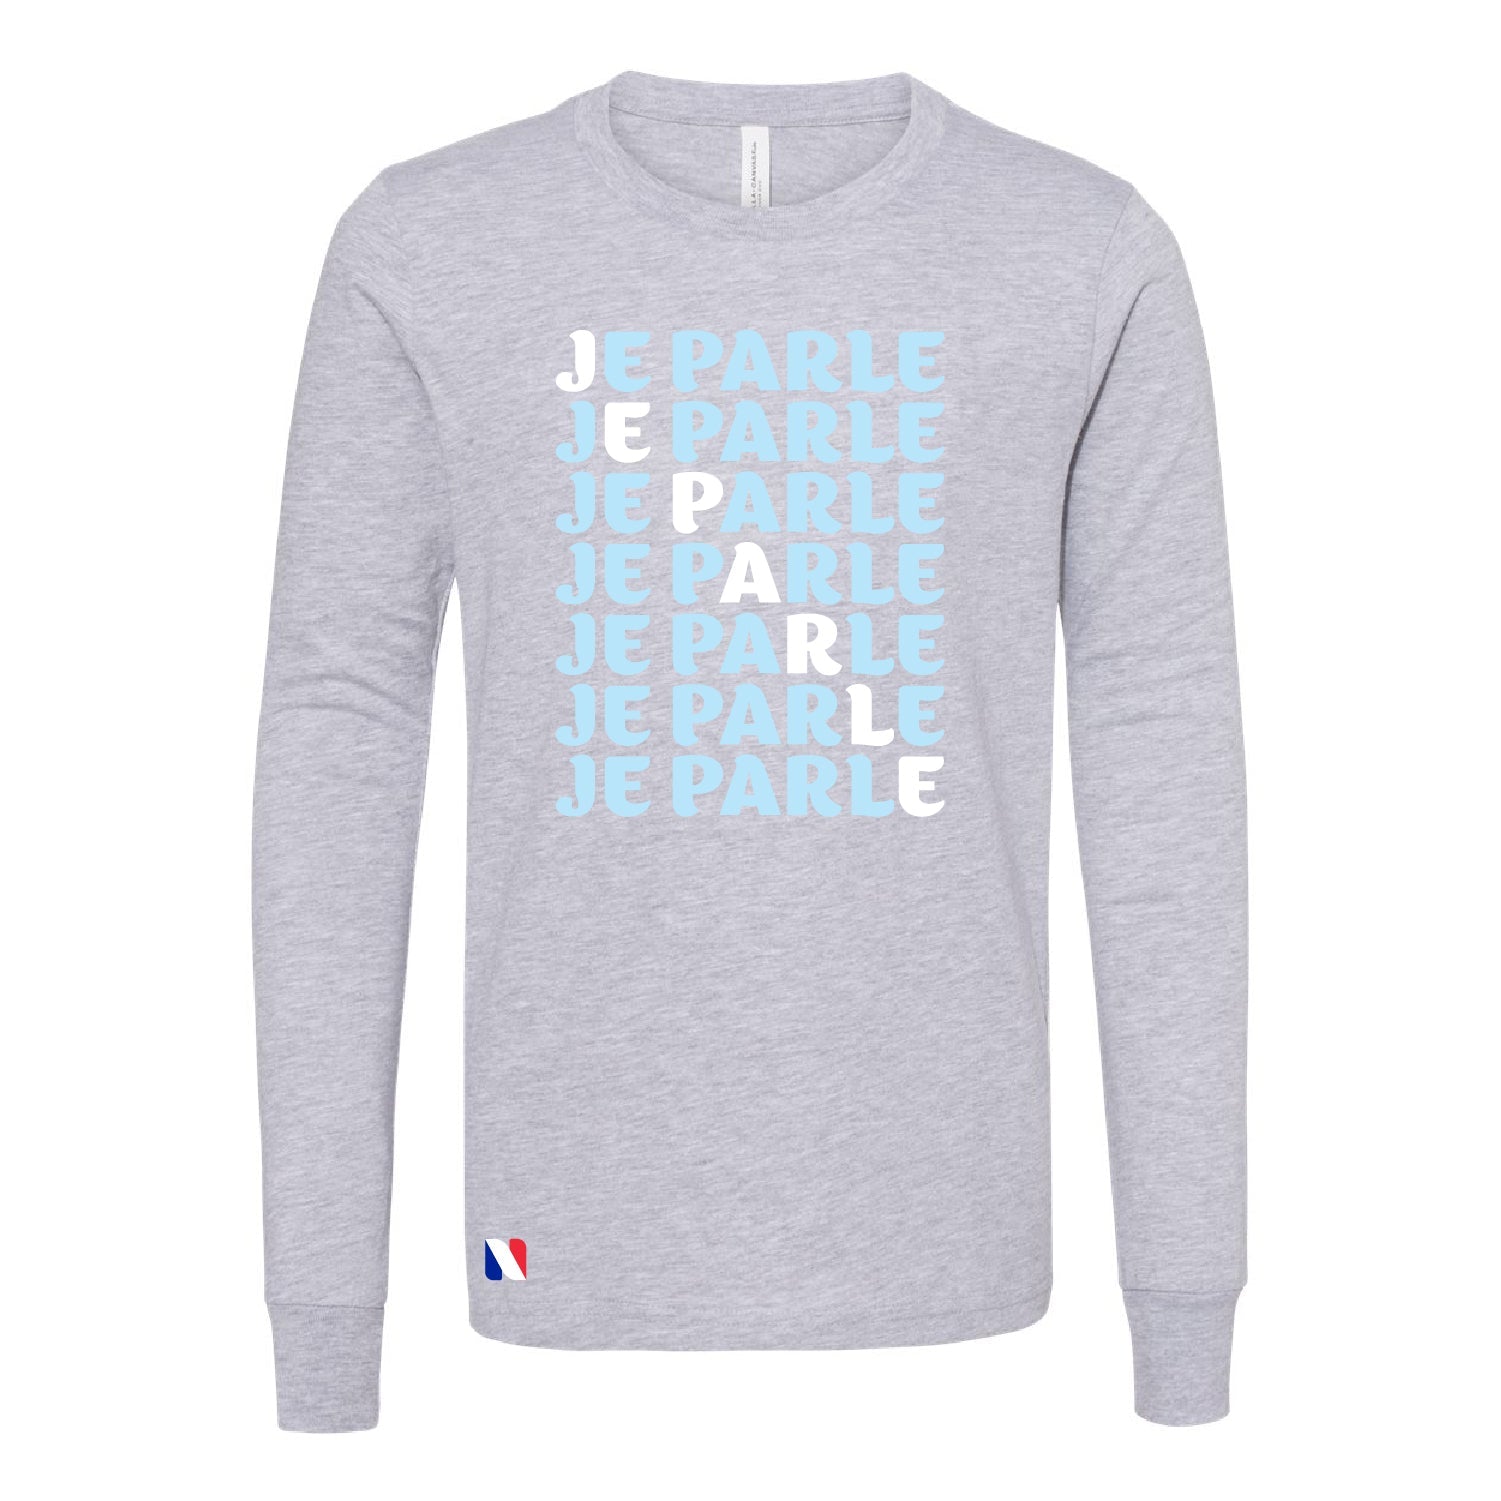 JE PARLE – YOUTH LONG SLEEVE TEE - DSP On Demand